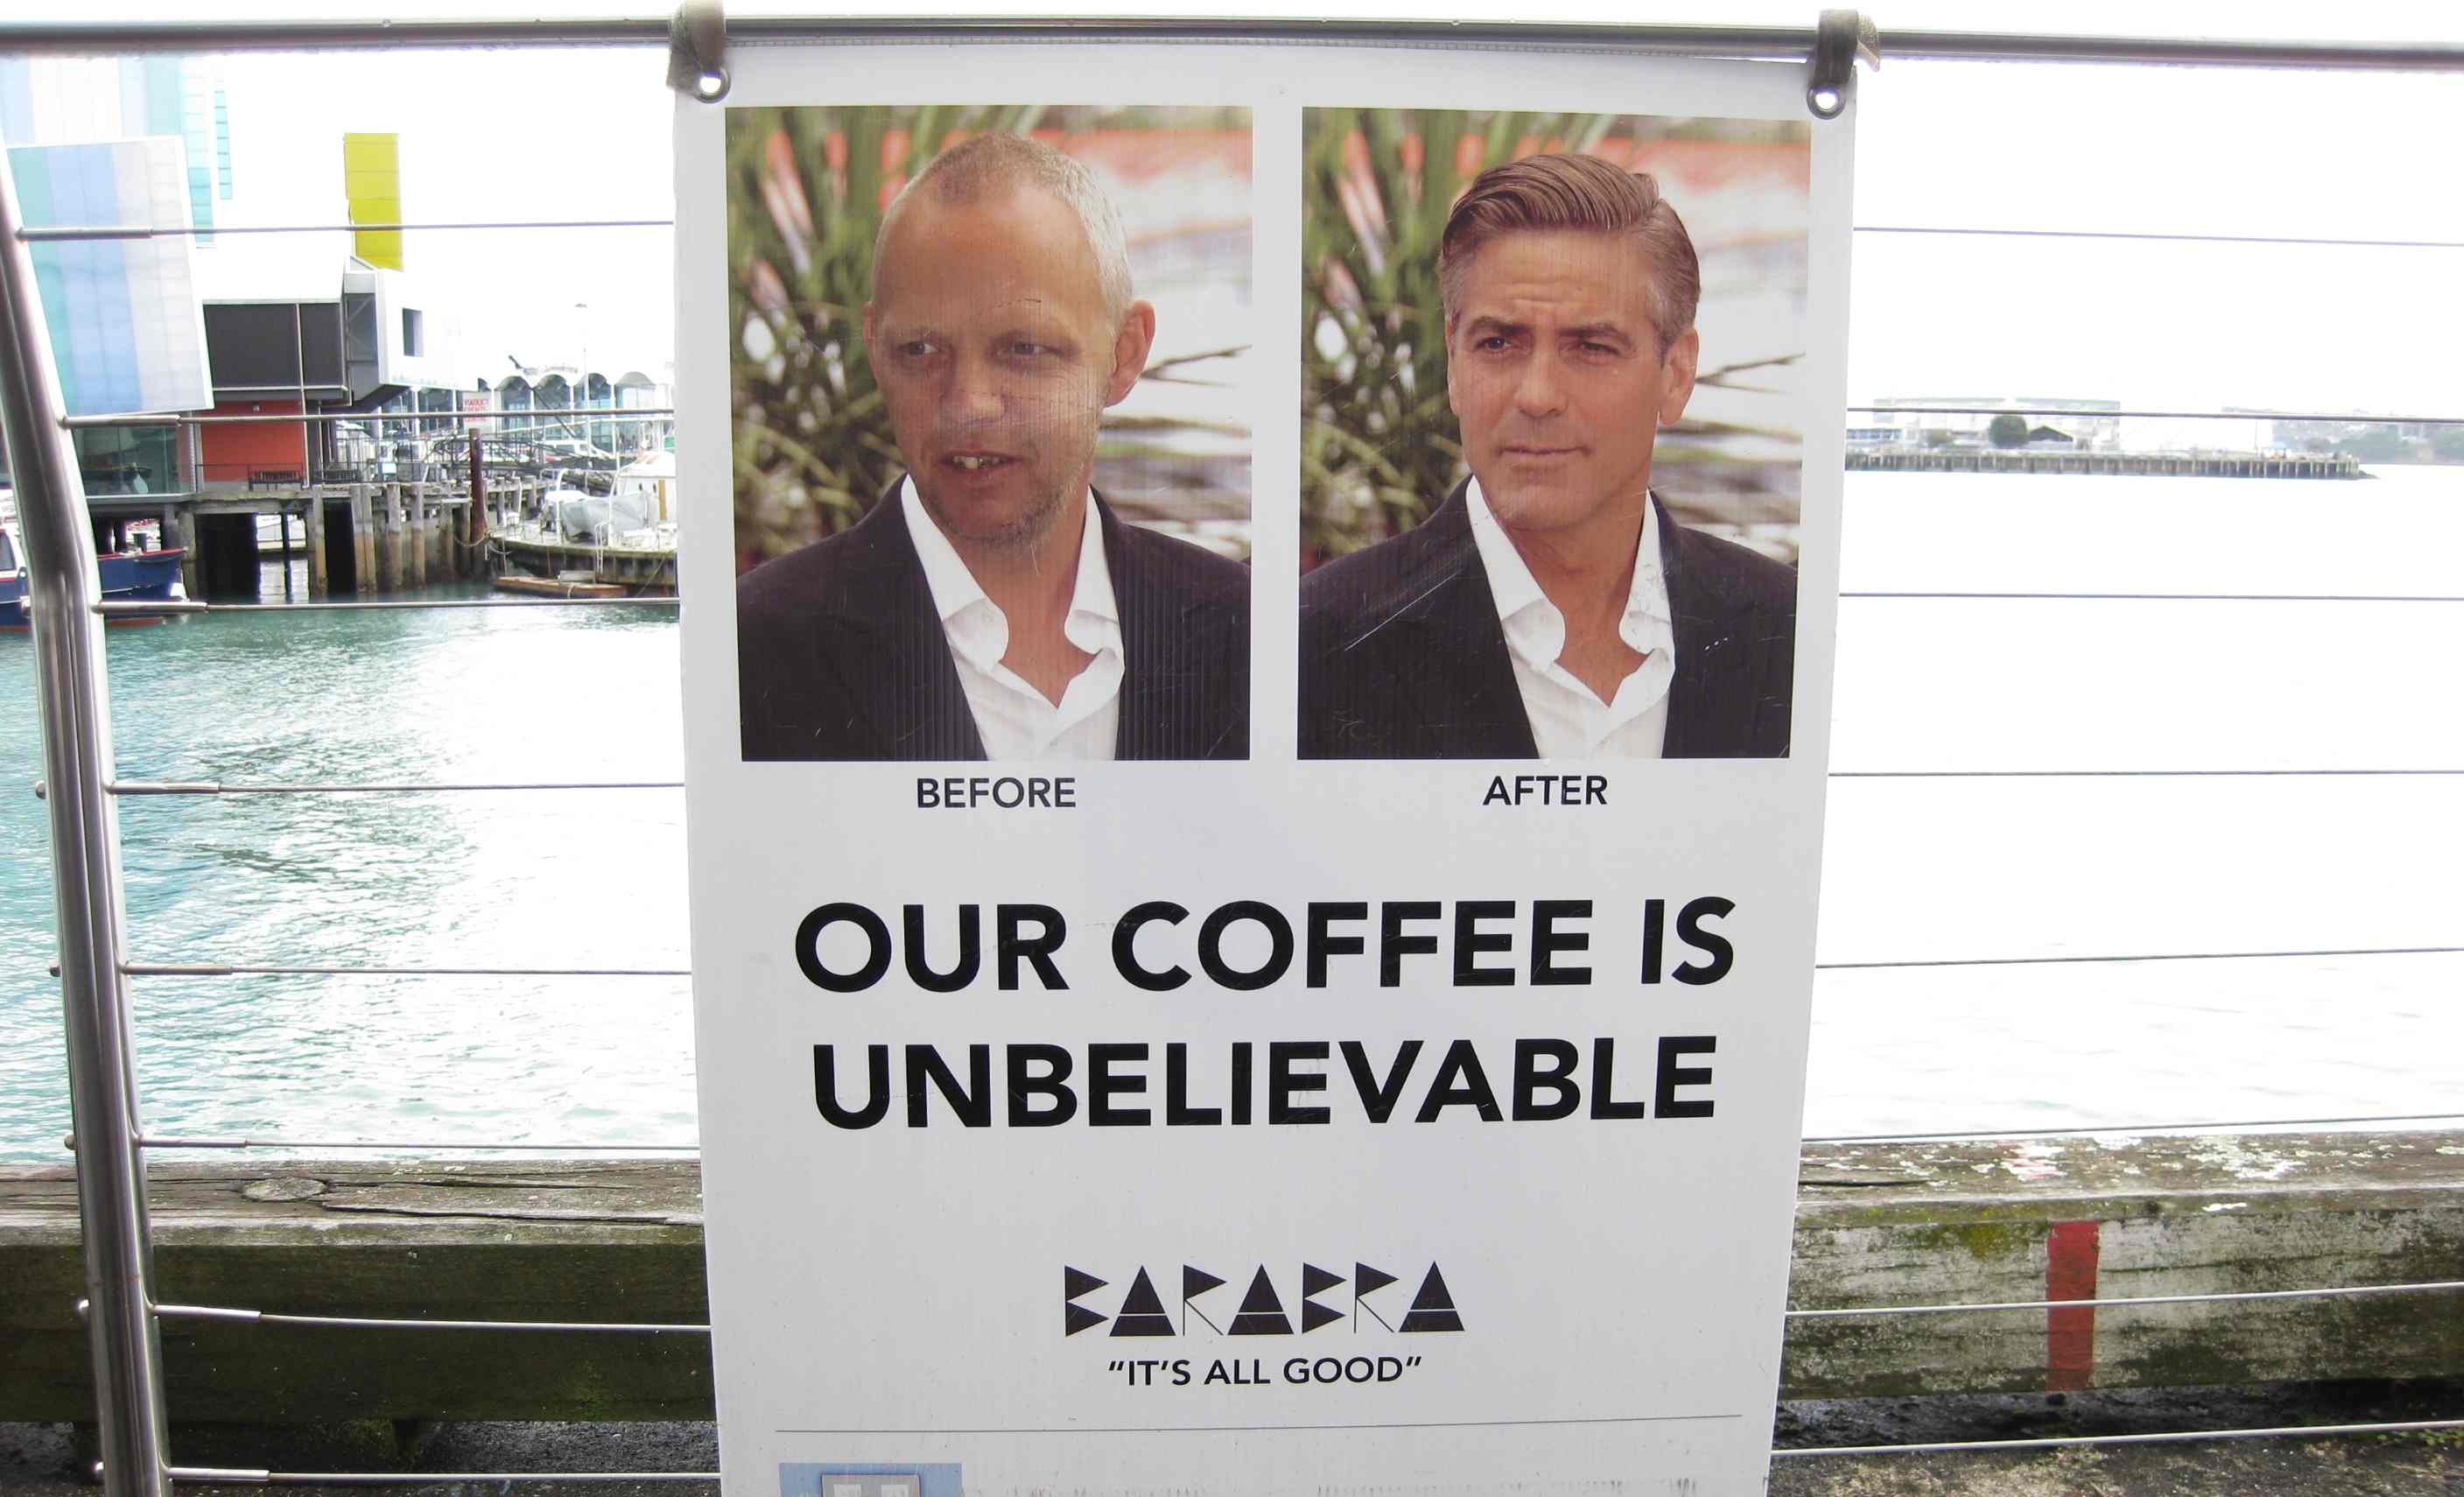 Advertising for a café in Auckland, New Zealand